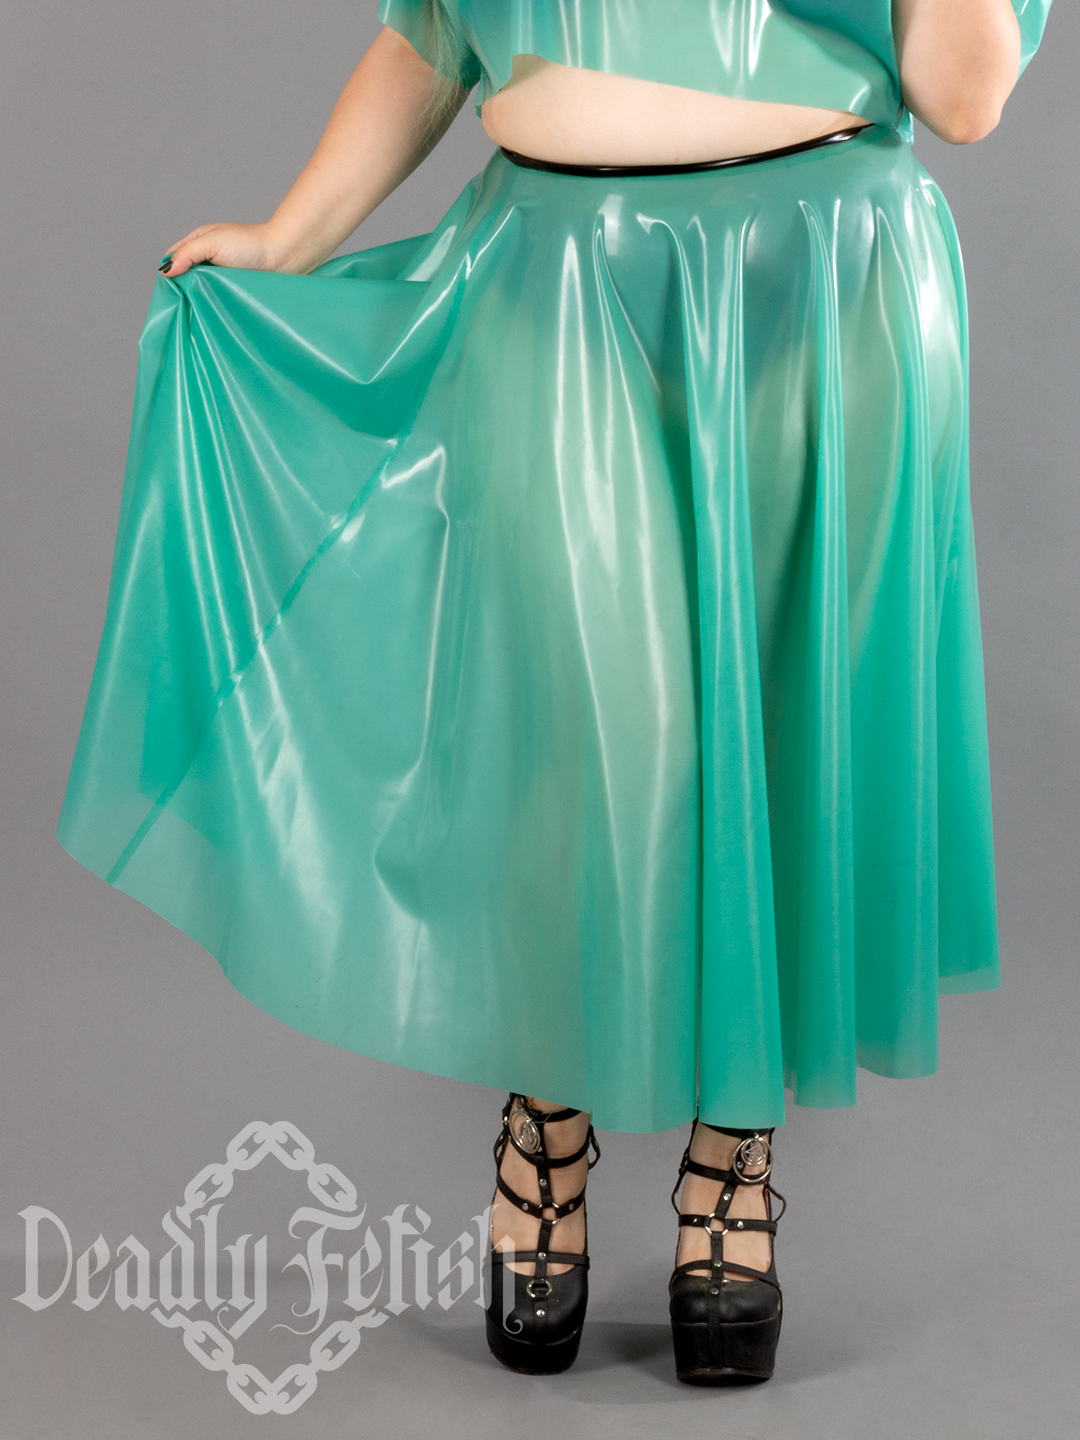 Deadly Fetish Made-To-Order Latex: Skirt #01